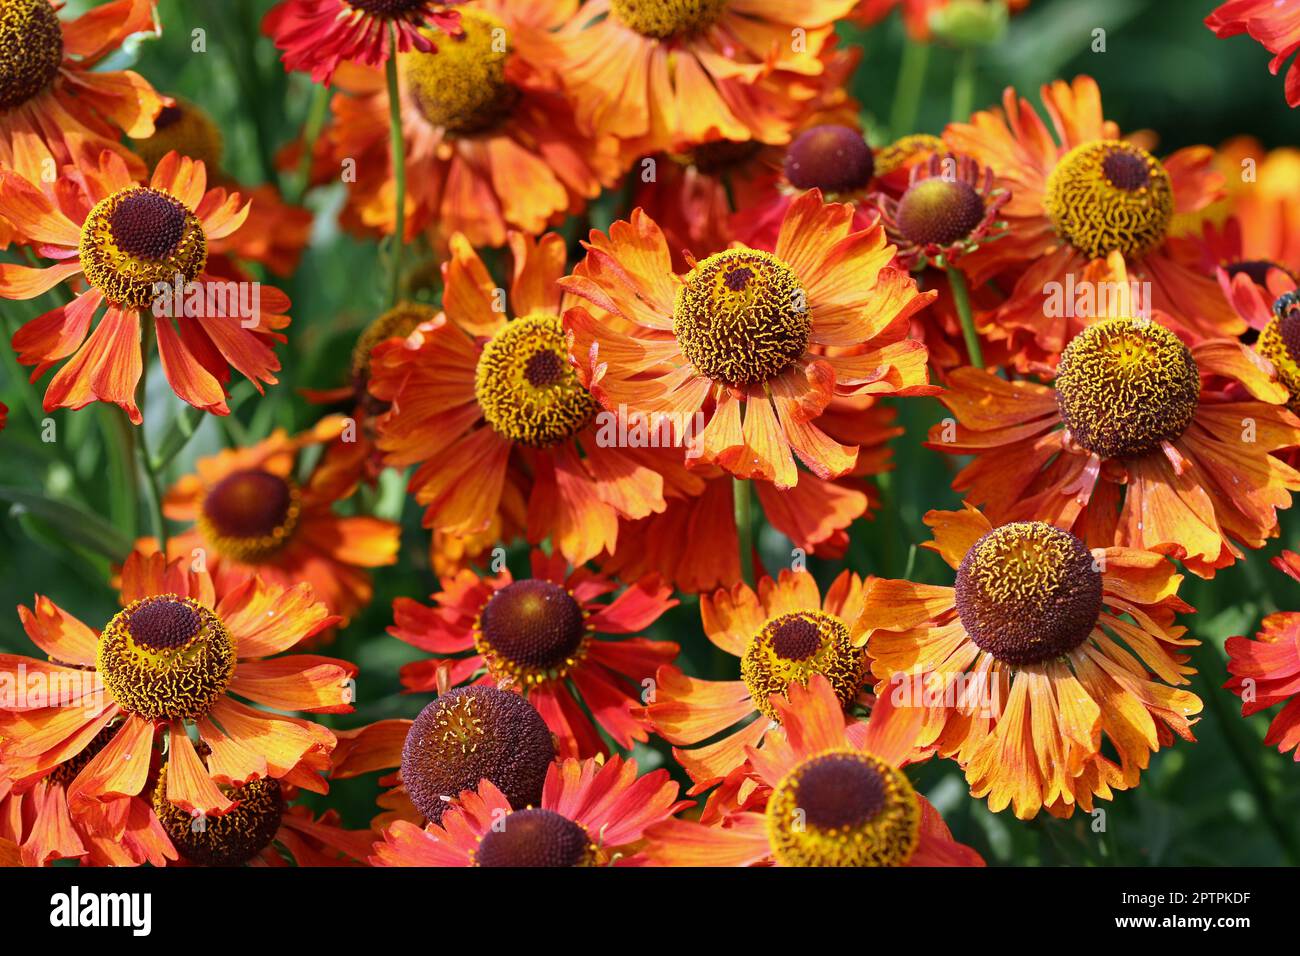 Orange sneezeweed, Helenium unknown species and variety, flowers in close up with a background of blurred leaves. Stock Photo